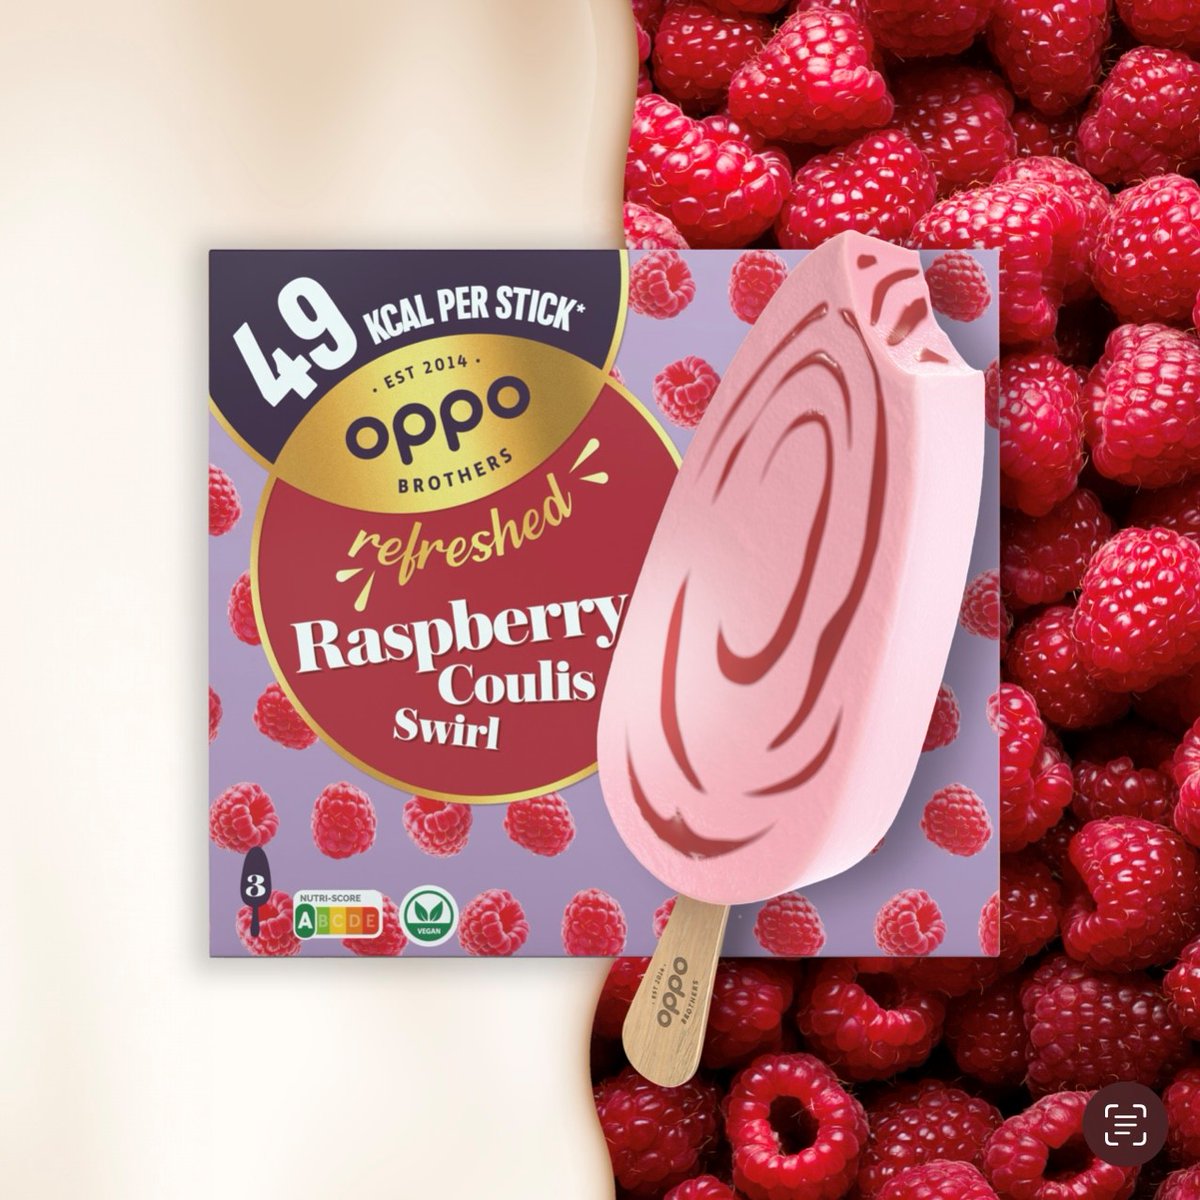 🩷 NEW OPPO REFRESHED 🩷 slow-churned creamy sorbetto made with 43% raspberry purée and rippled with a small-batch-cooked tangy raspberry coulis swirl! INDULGE. REFRESH. REPEAT. Available now via @gopuff and coming soon to @Ocado ☀🍦🌱 #IndulgeInLife